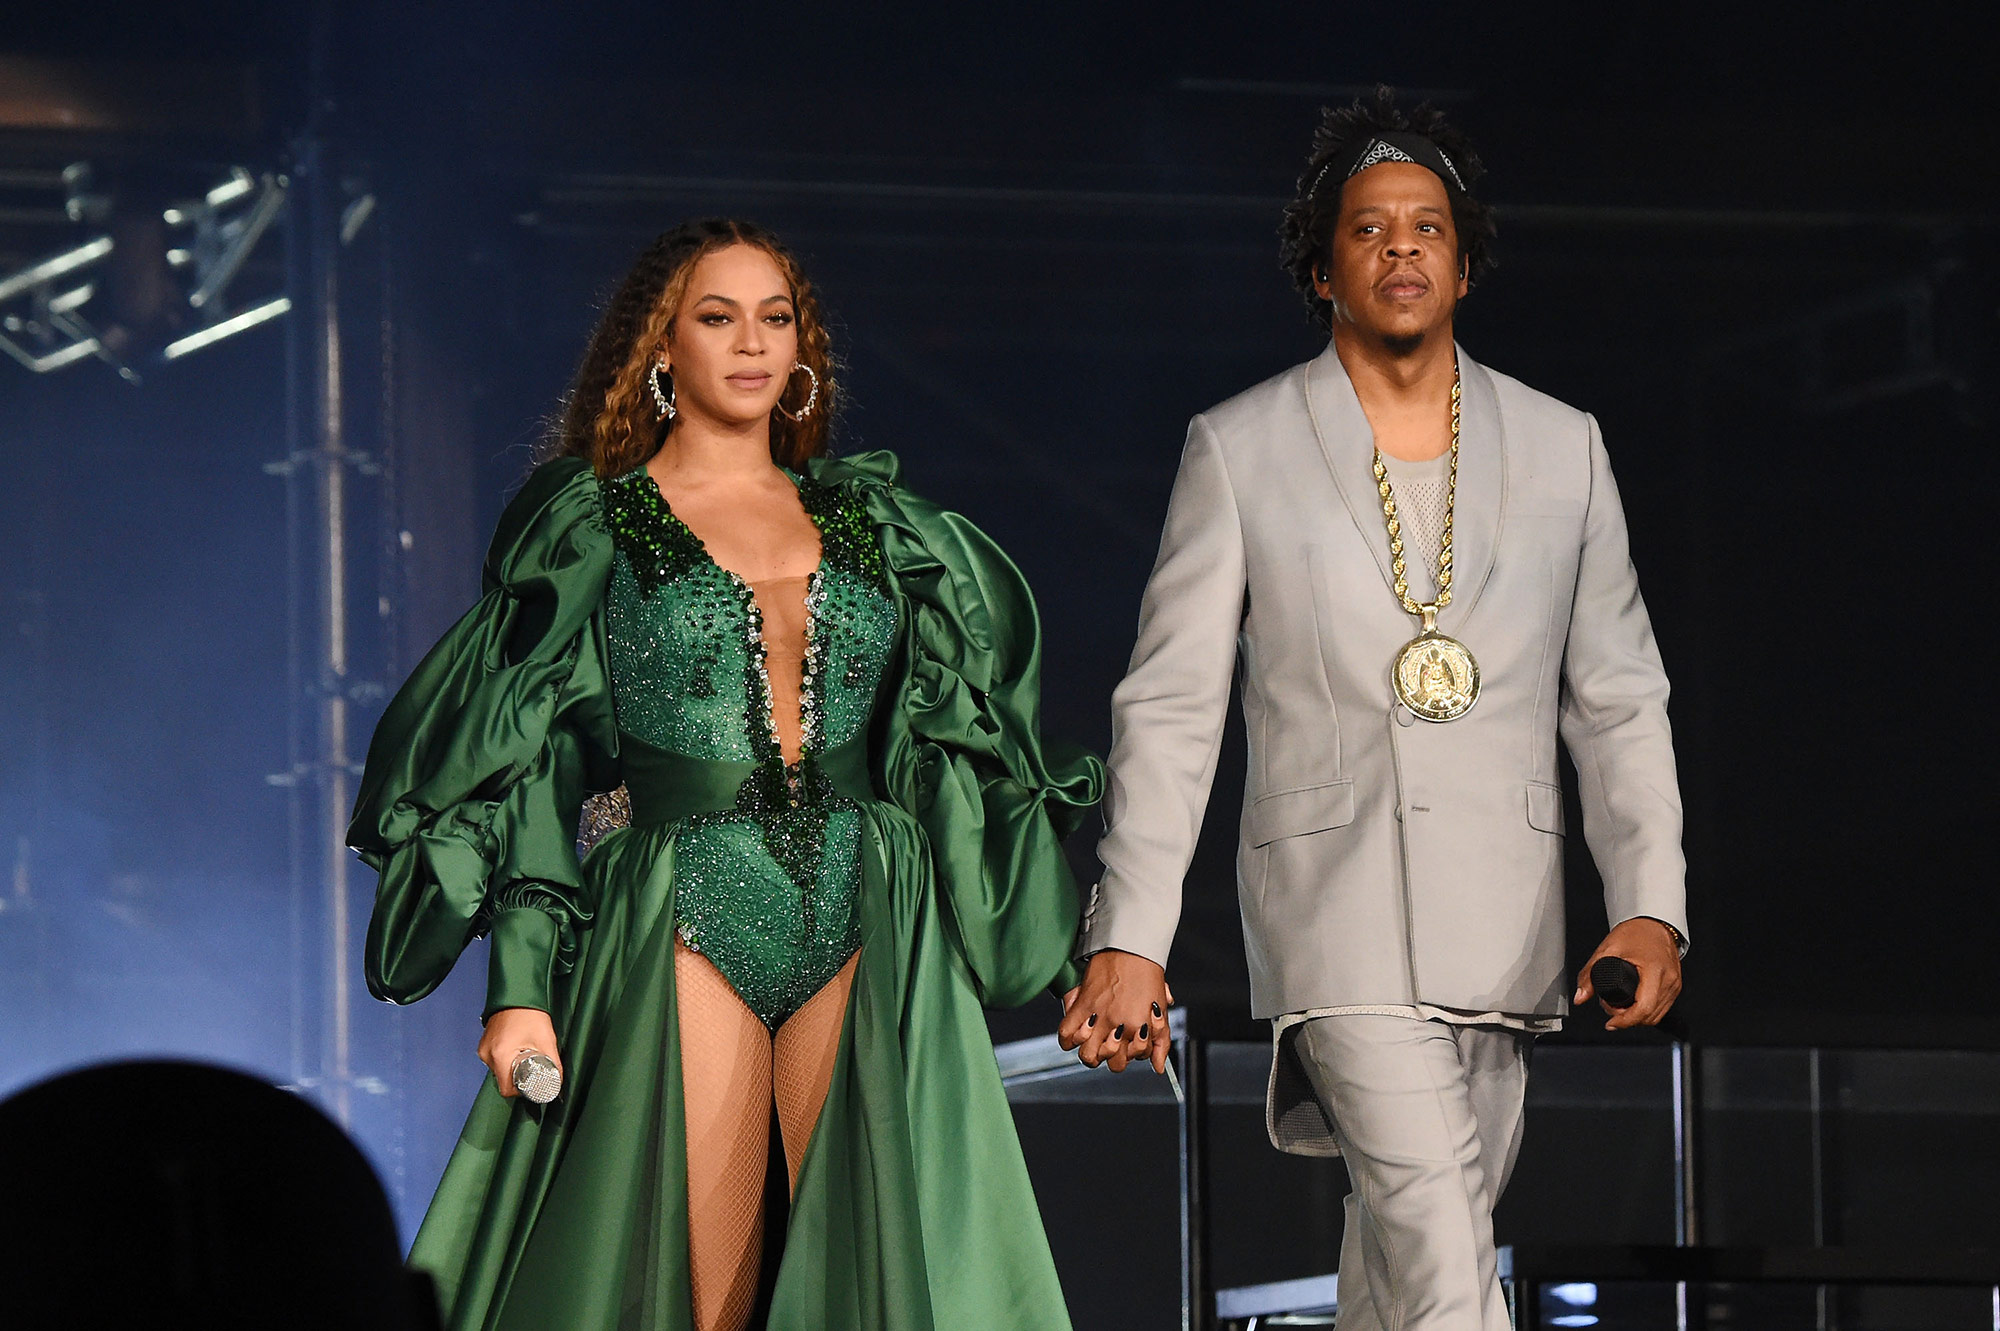 Beyoncé and Jay-Z perform in 2018.